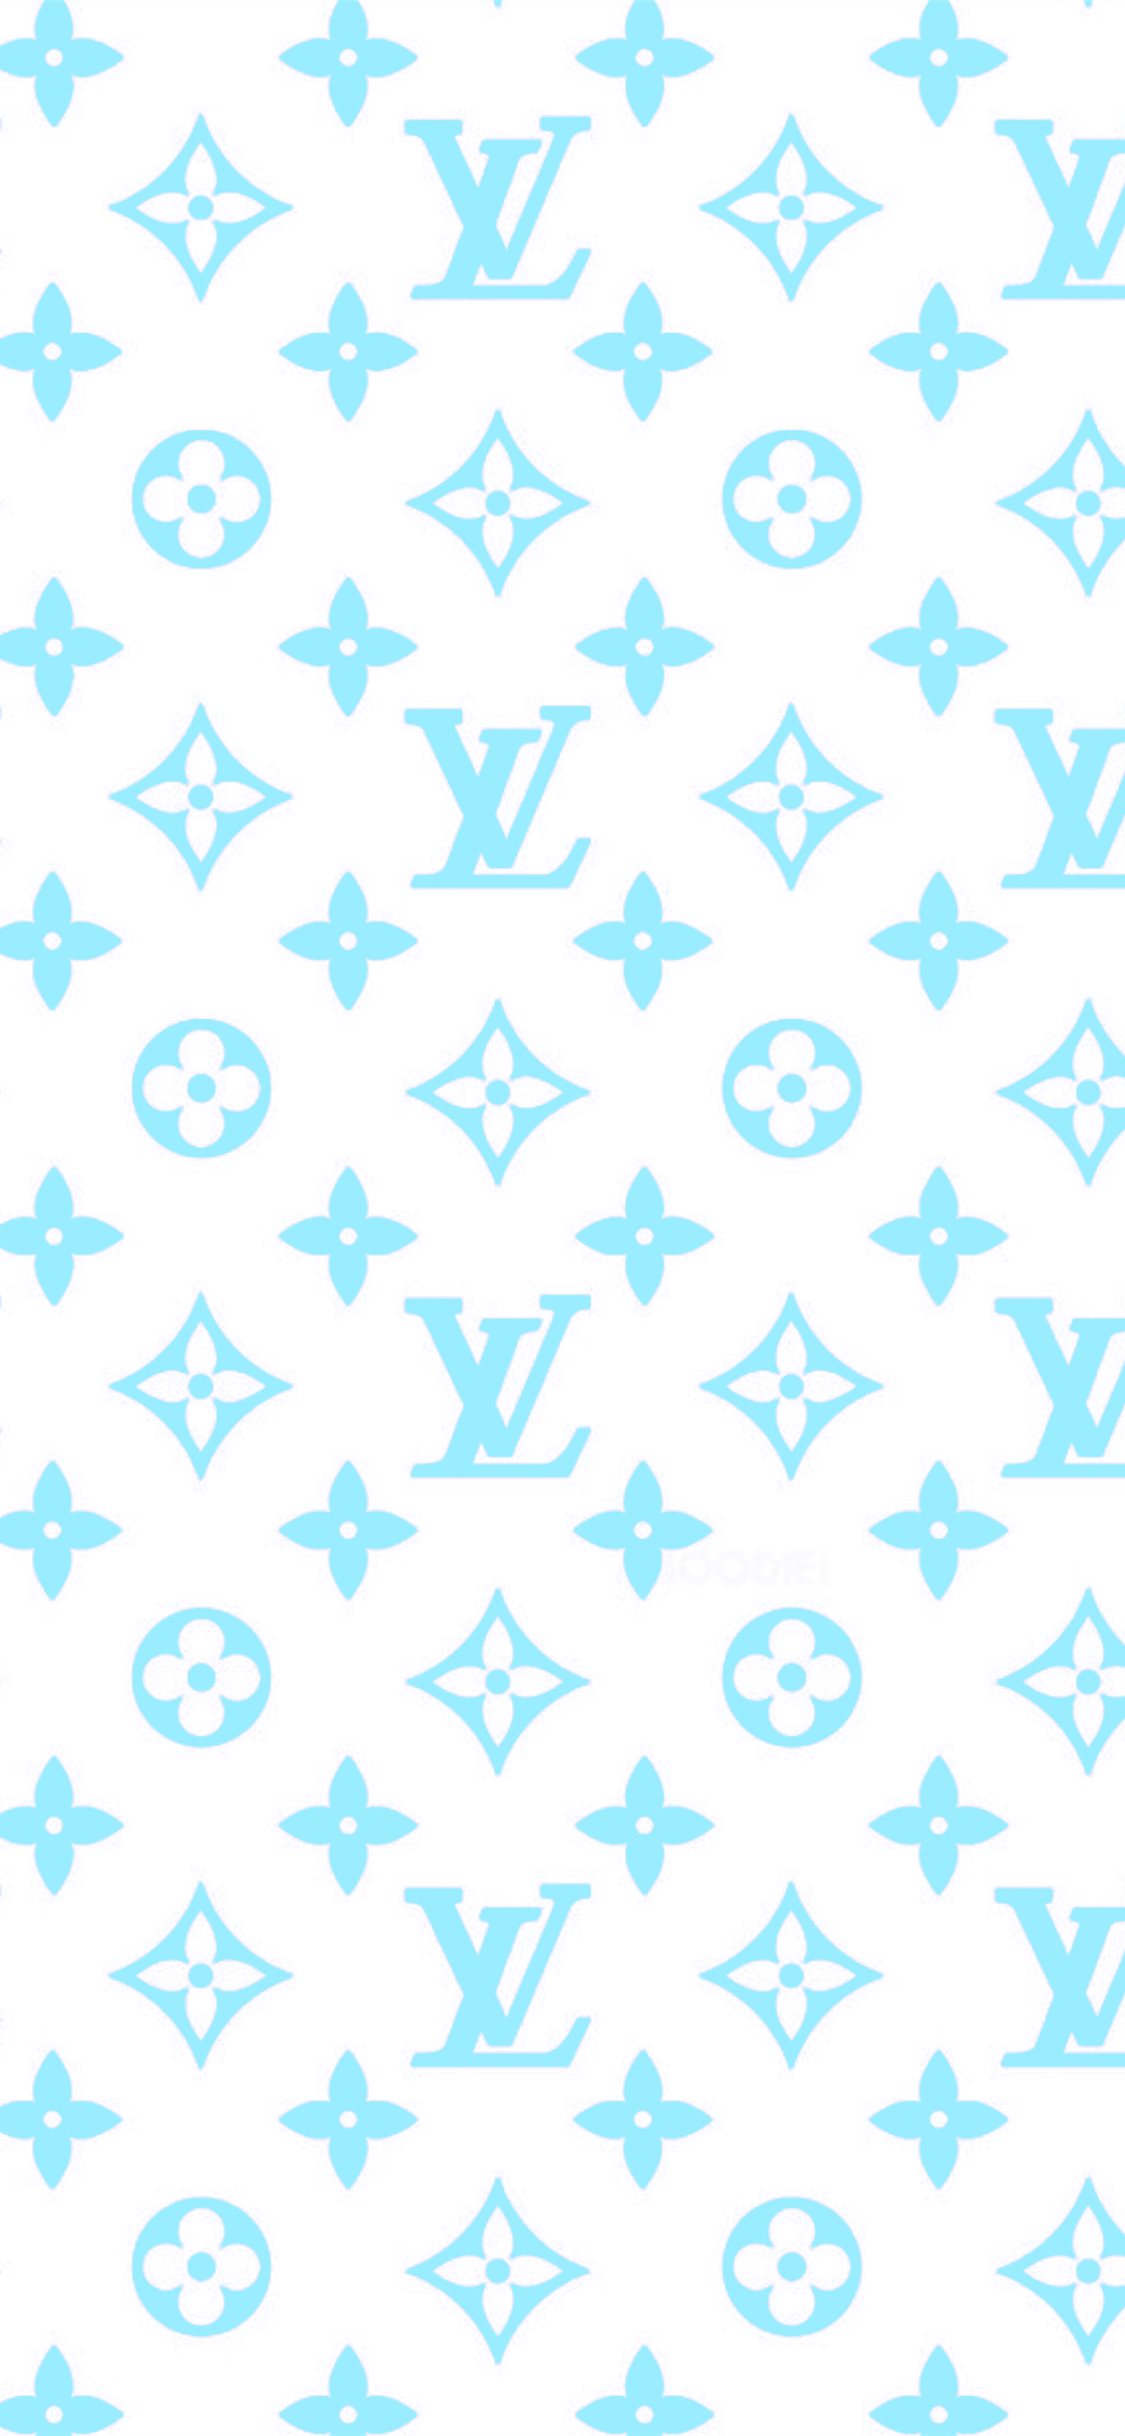 iPhone6papers - vf21-louis-vuitton-blue-pattern-art